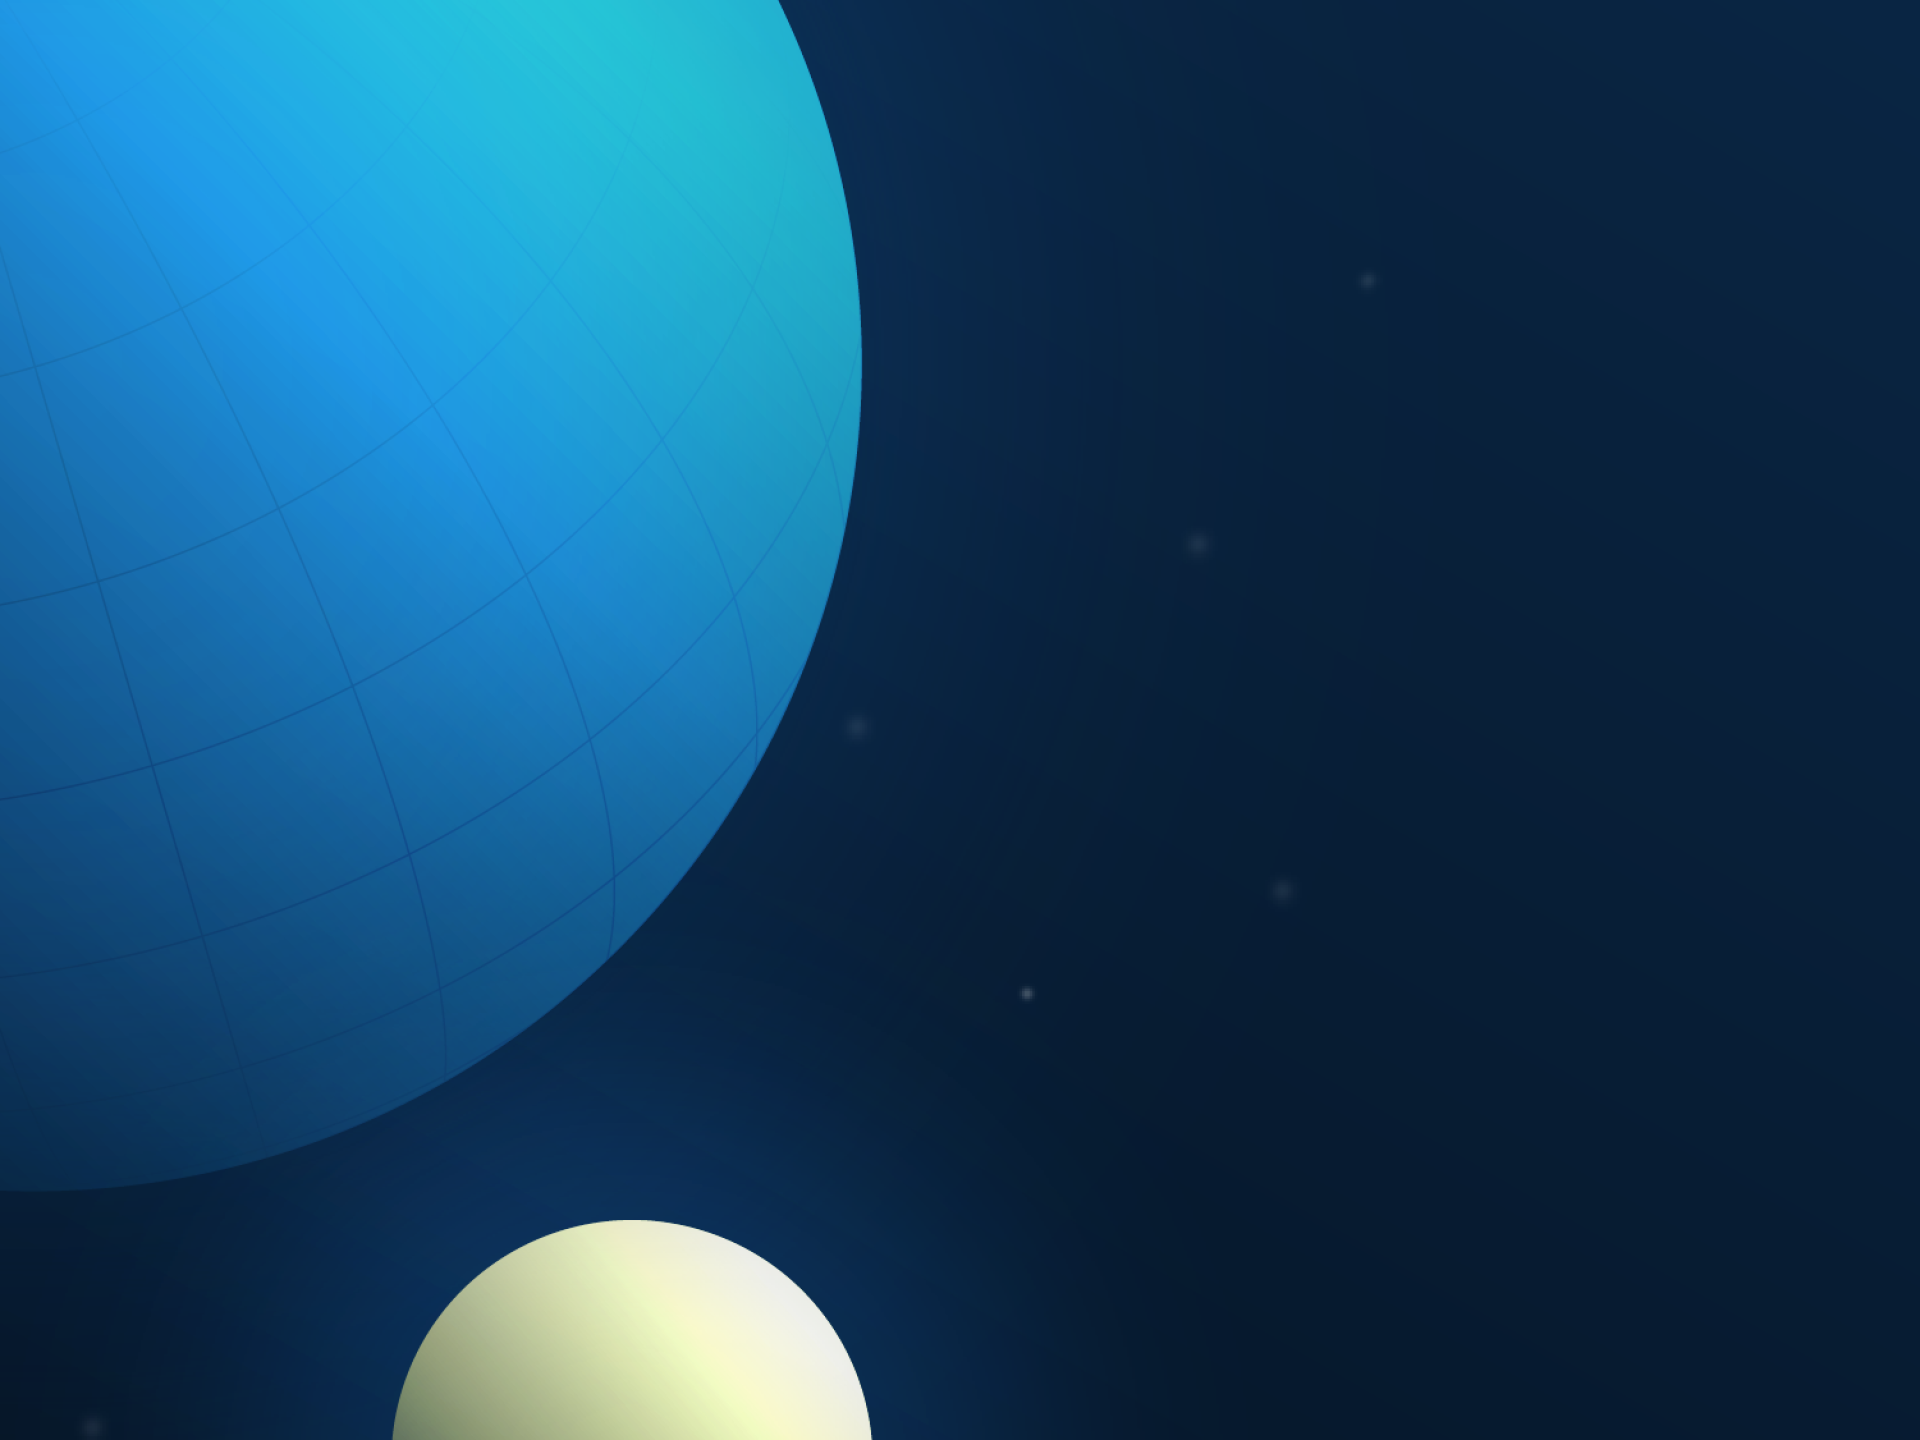 A planet and a satellite depict the concepts of microsites